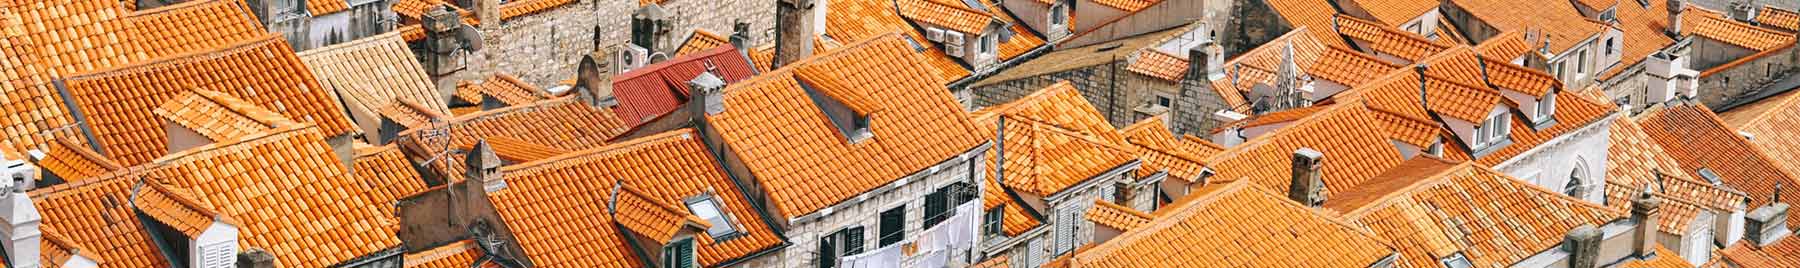 an overhead view of orange tiled roofs